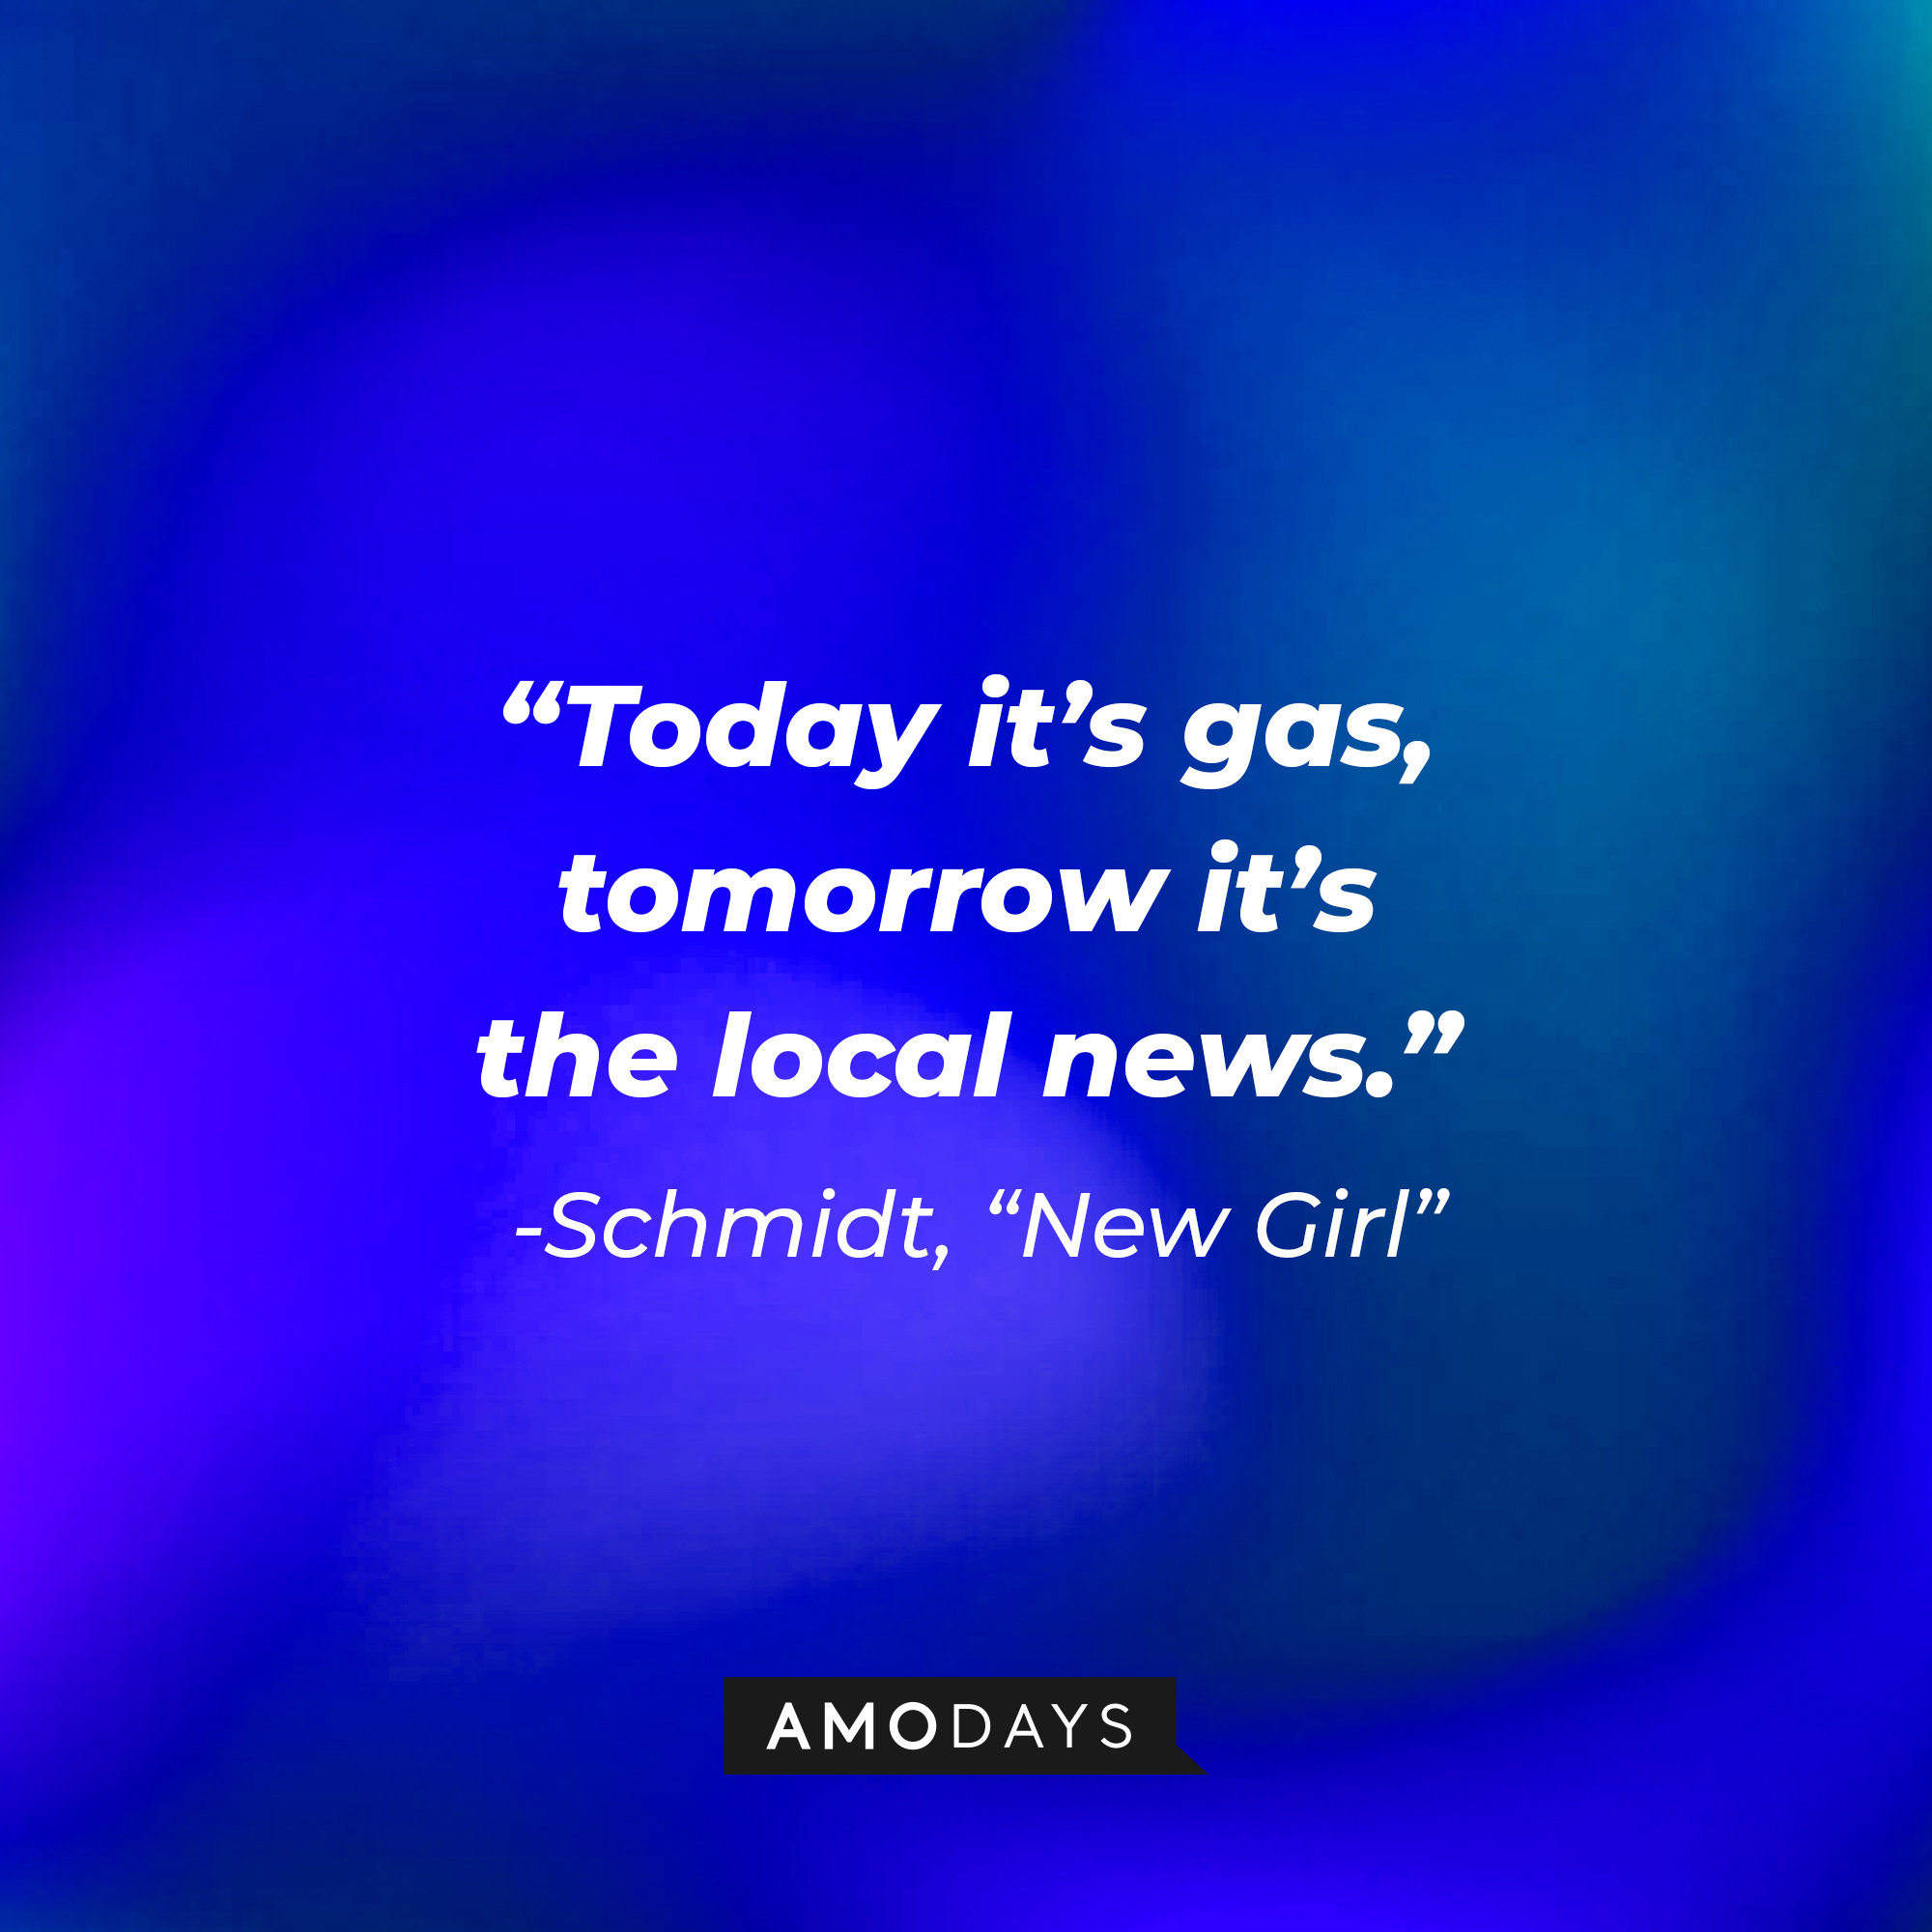 Schmidt's quote: "Today it’s gas, tomorrow it’s the local news." | Source: Amodays